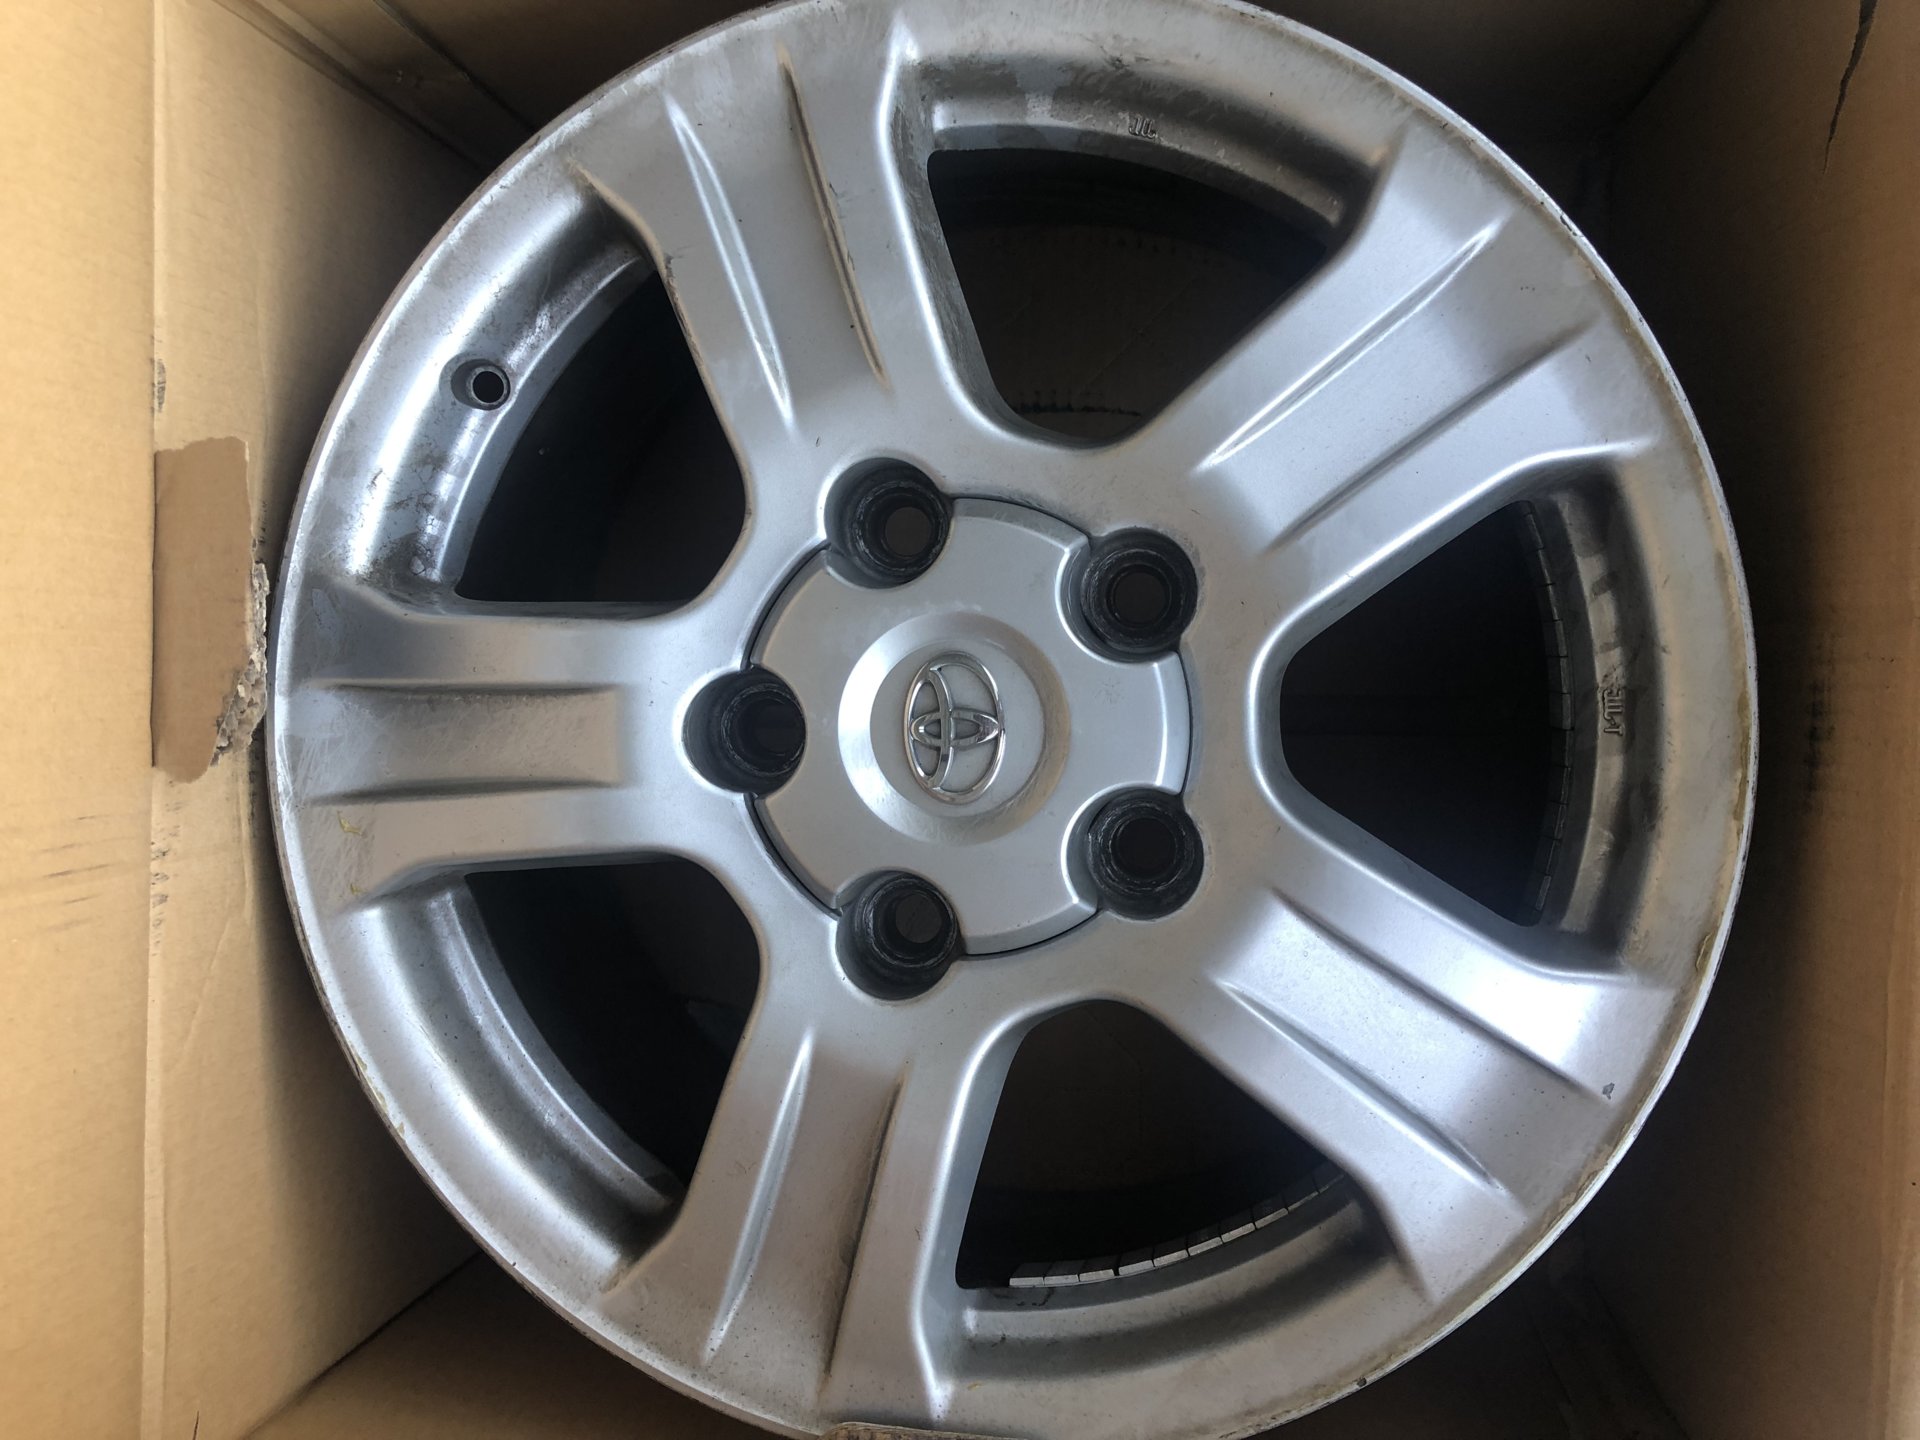 Wanted - 4 OEM Wheels for 2004 Land Cruiser 18in (Southern ...